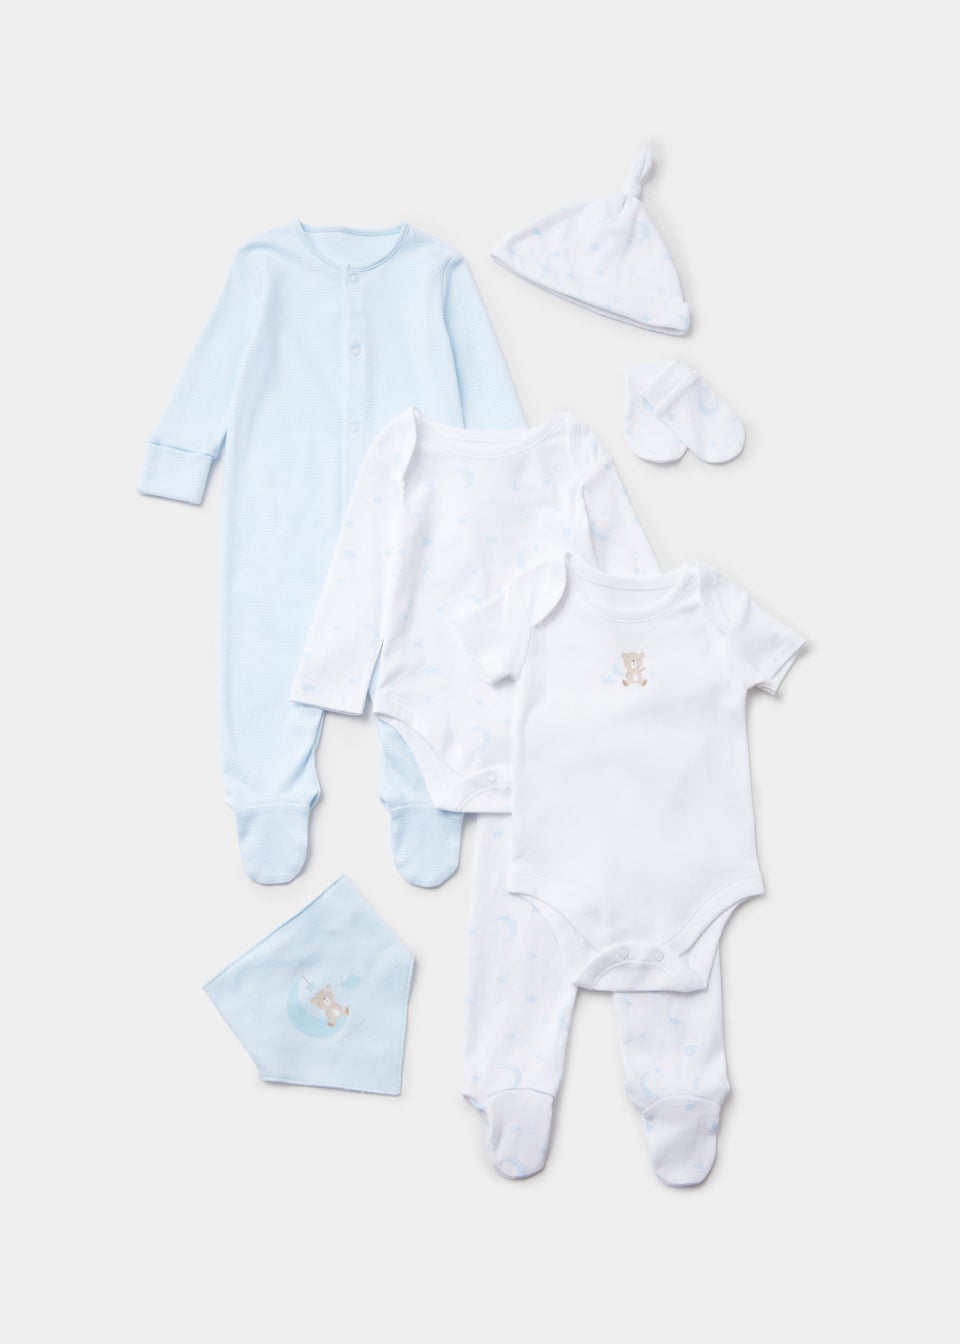 Baby 7 Piece Blue Layette Set (Tiny Baby-6mths)